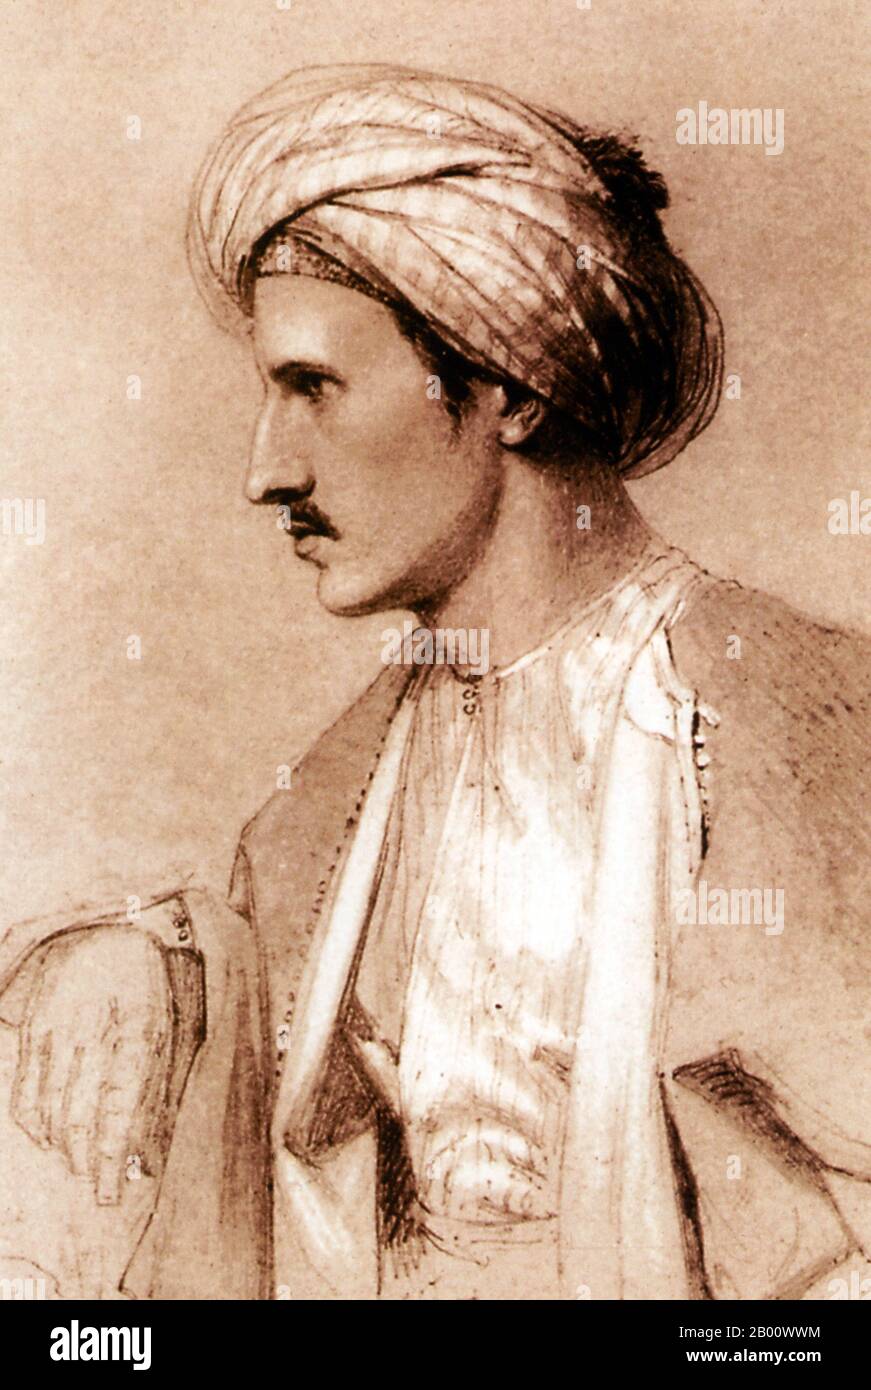 Egypt: A portrait of Edward W. Lane in traditional Ottoman dress, sketched by his brother, Richard James Lane (1800-1872), in Cairo in 1825.   Edward William Lane (1801-1876) was a British Orientalist, translator and Arabic scholar who lived in Ottoman Cairo from 1825-28. So fascinated was he with Egypt, he dressed as an Ottoman Turk and spent much time sketching the backstreets of Cairo. Upon his return to England he translated the novel ‘Arabian Nights’ [‘1001 nights’] and ‘Selections from the Qur’an’. Stock Photo